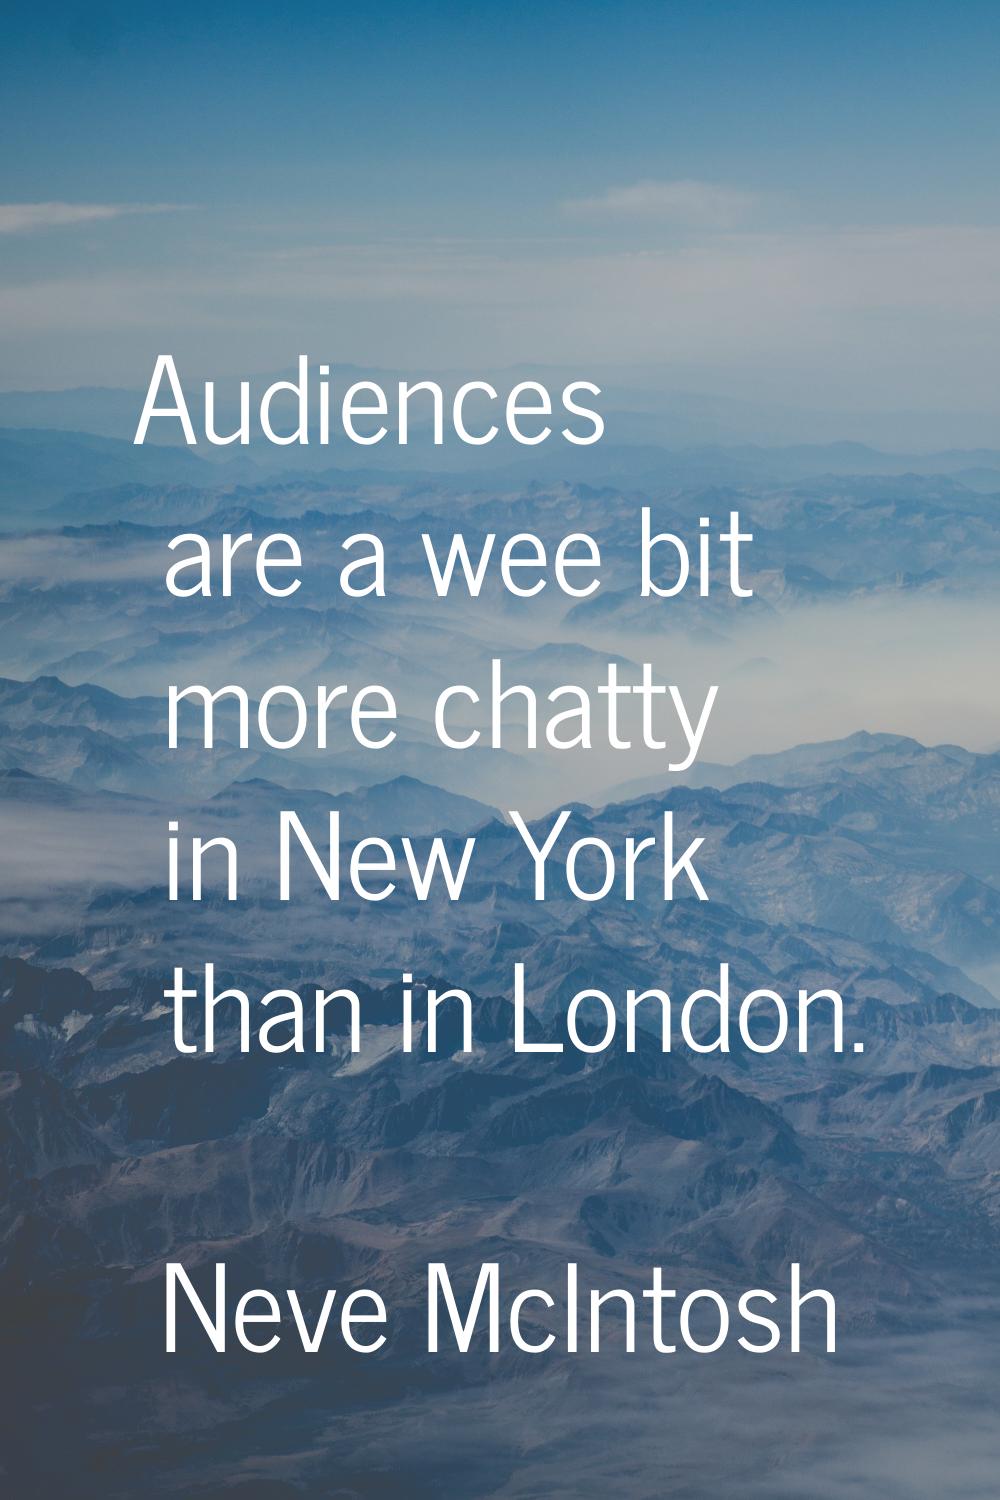 Audiences are a wee bit more chatty in New York than in London.